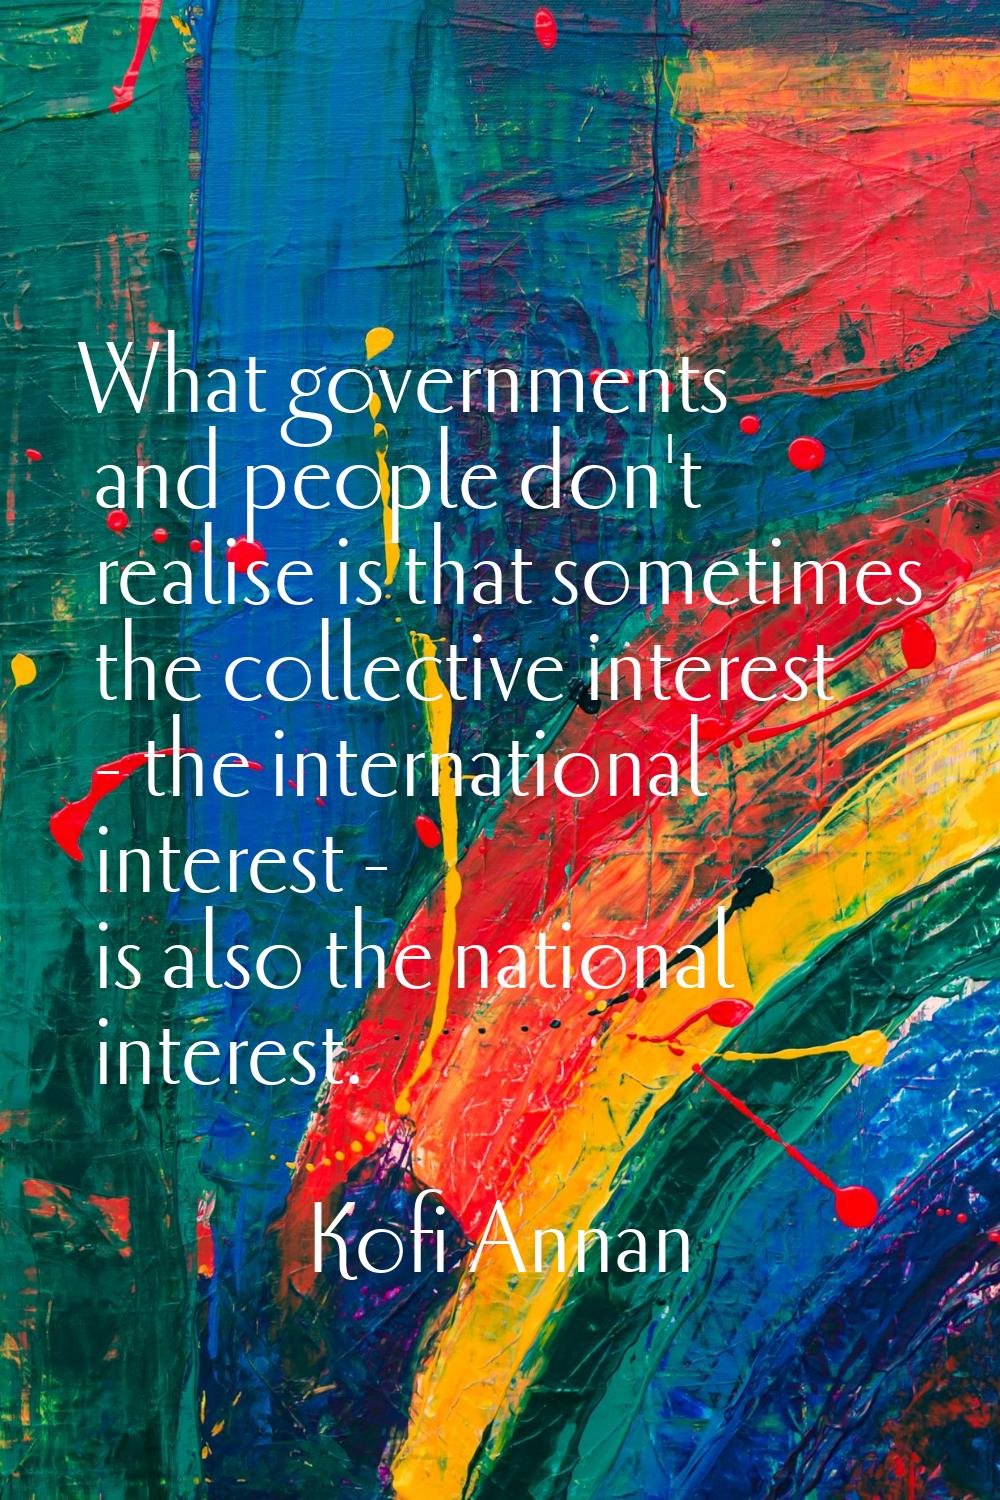 What governments and people don't realise is that sometimes the collective interest - the internati